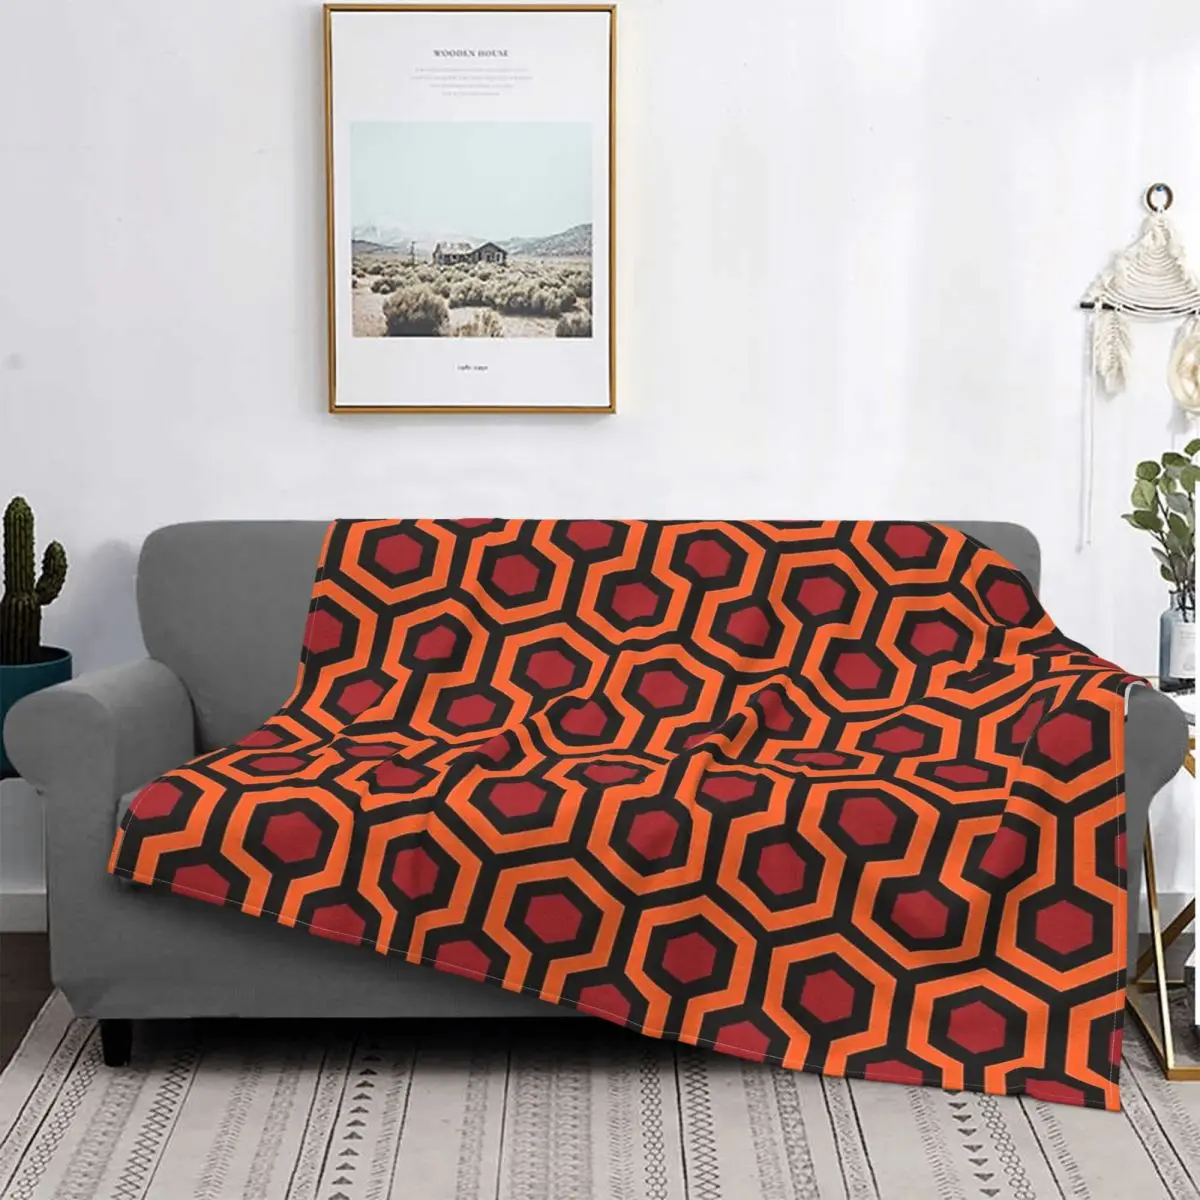 

Overlook Hotel Carpet The Shining 1 Blanket Bedspread Plaid Sofa Covers Bed Winter Furry